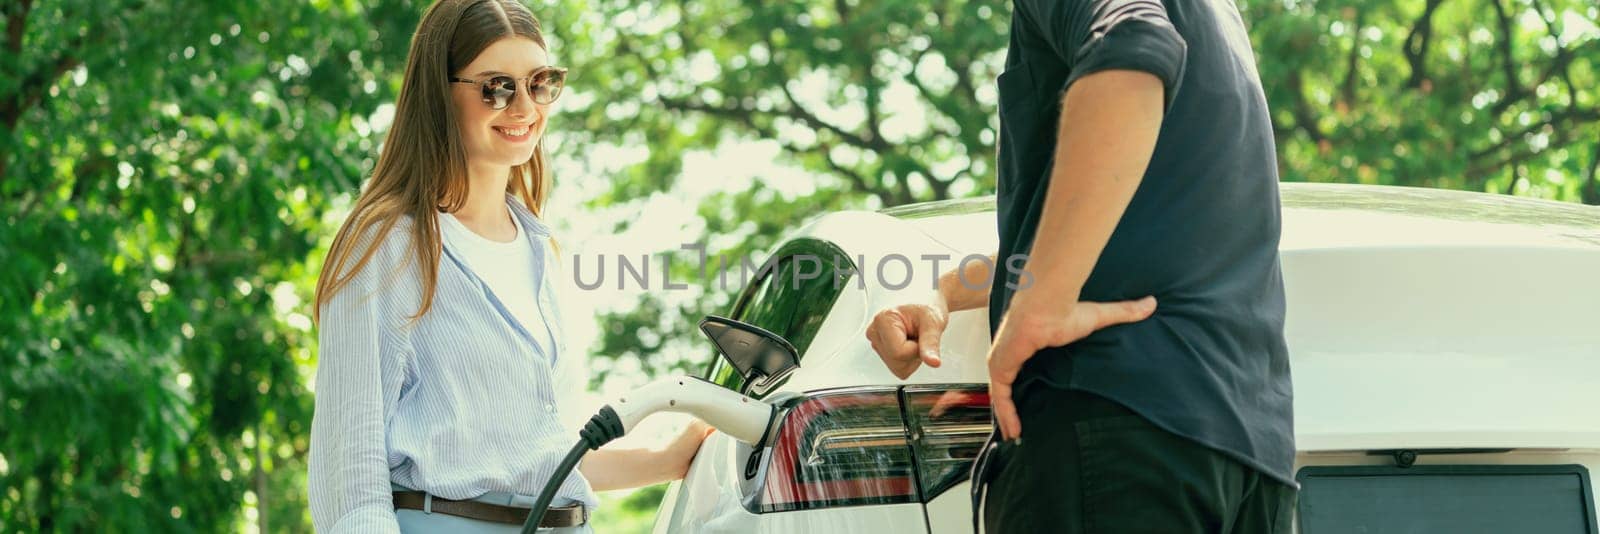 Focused EV car recharging electricity for battery on blurred couple. Exalt by biancoblue